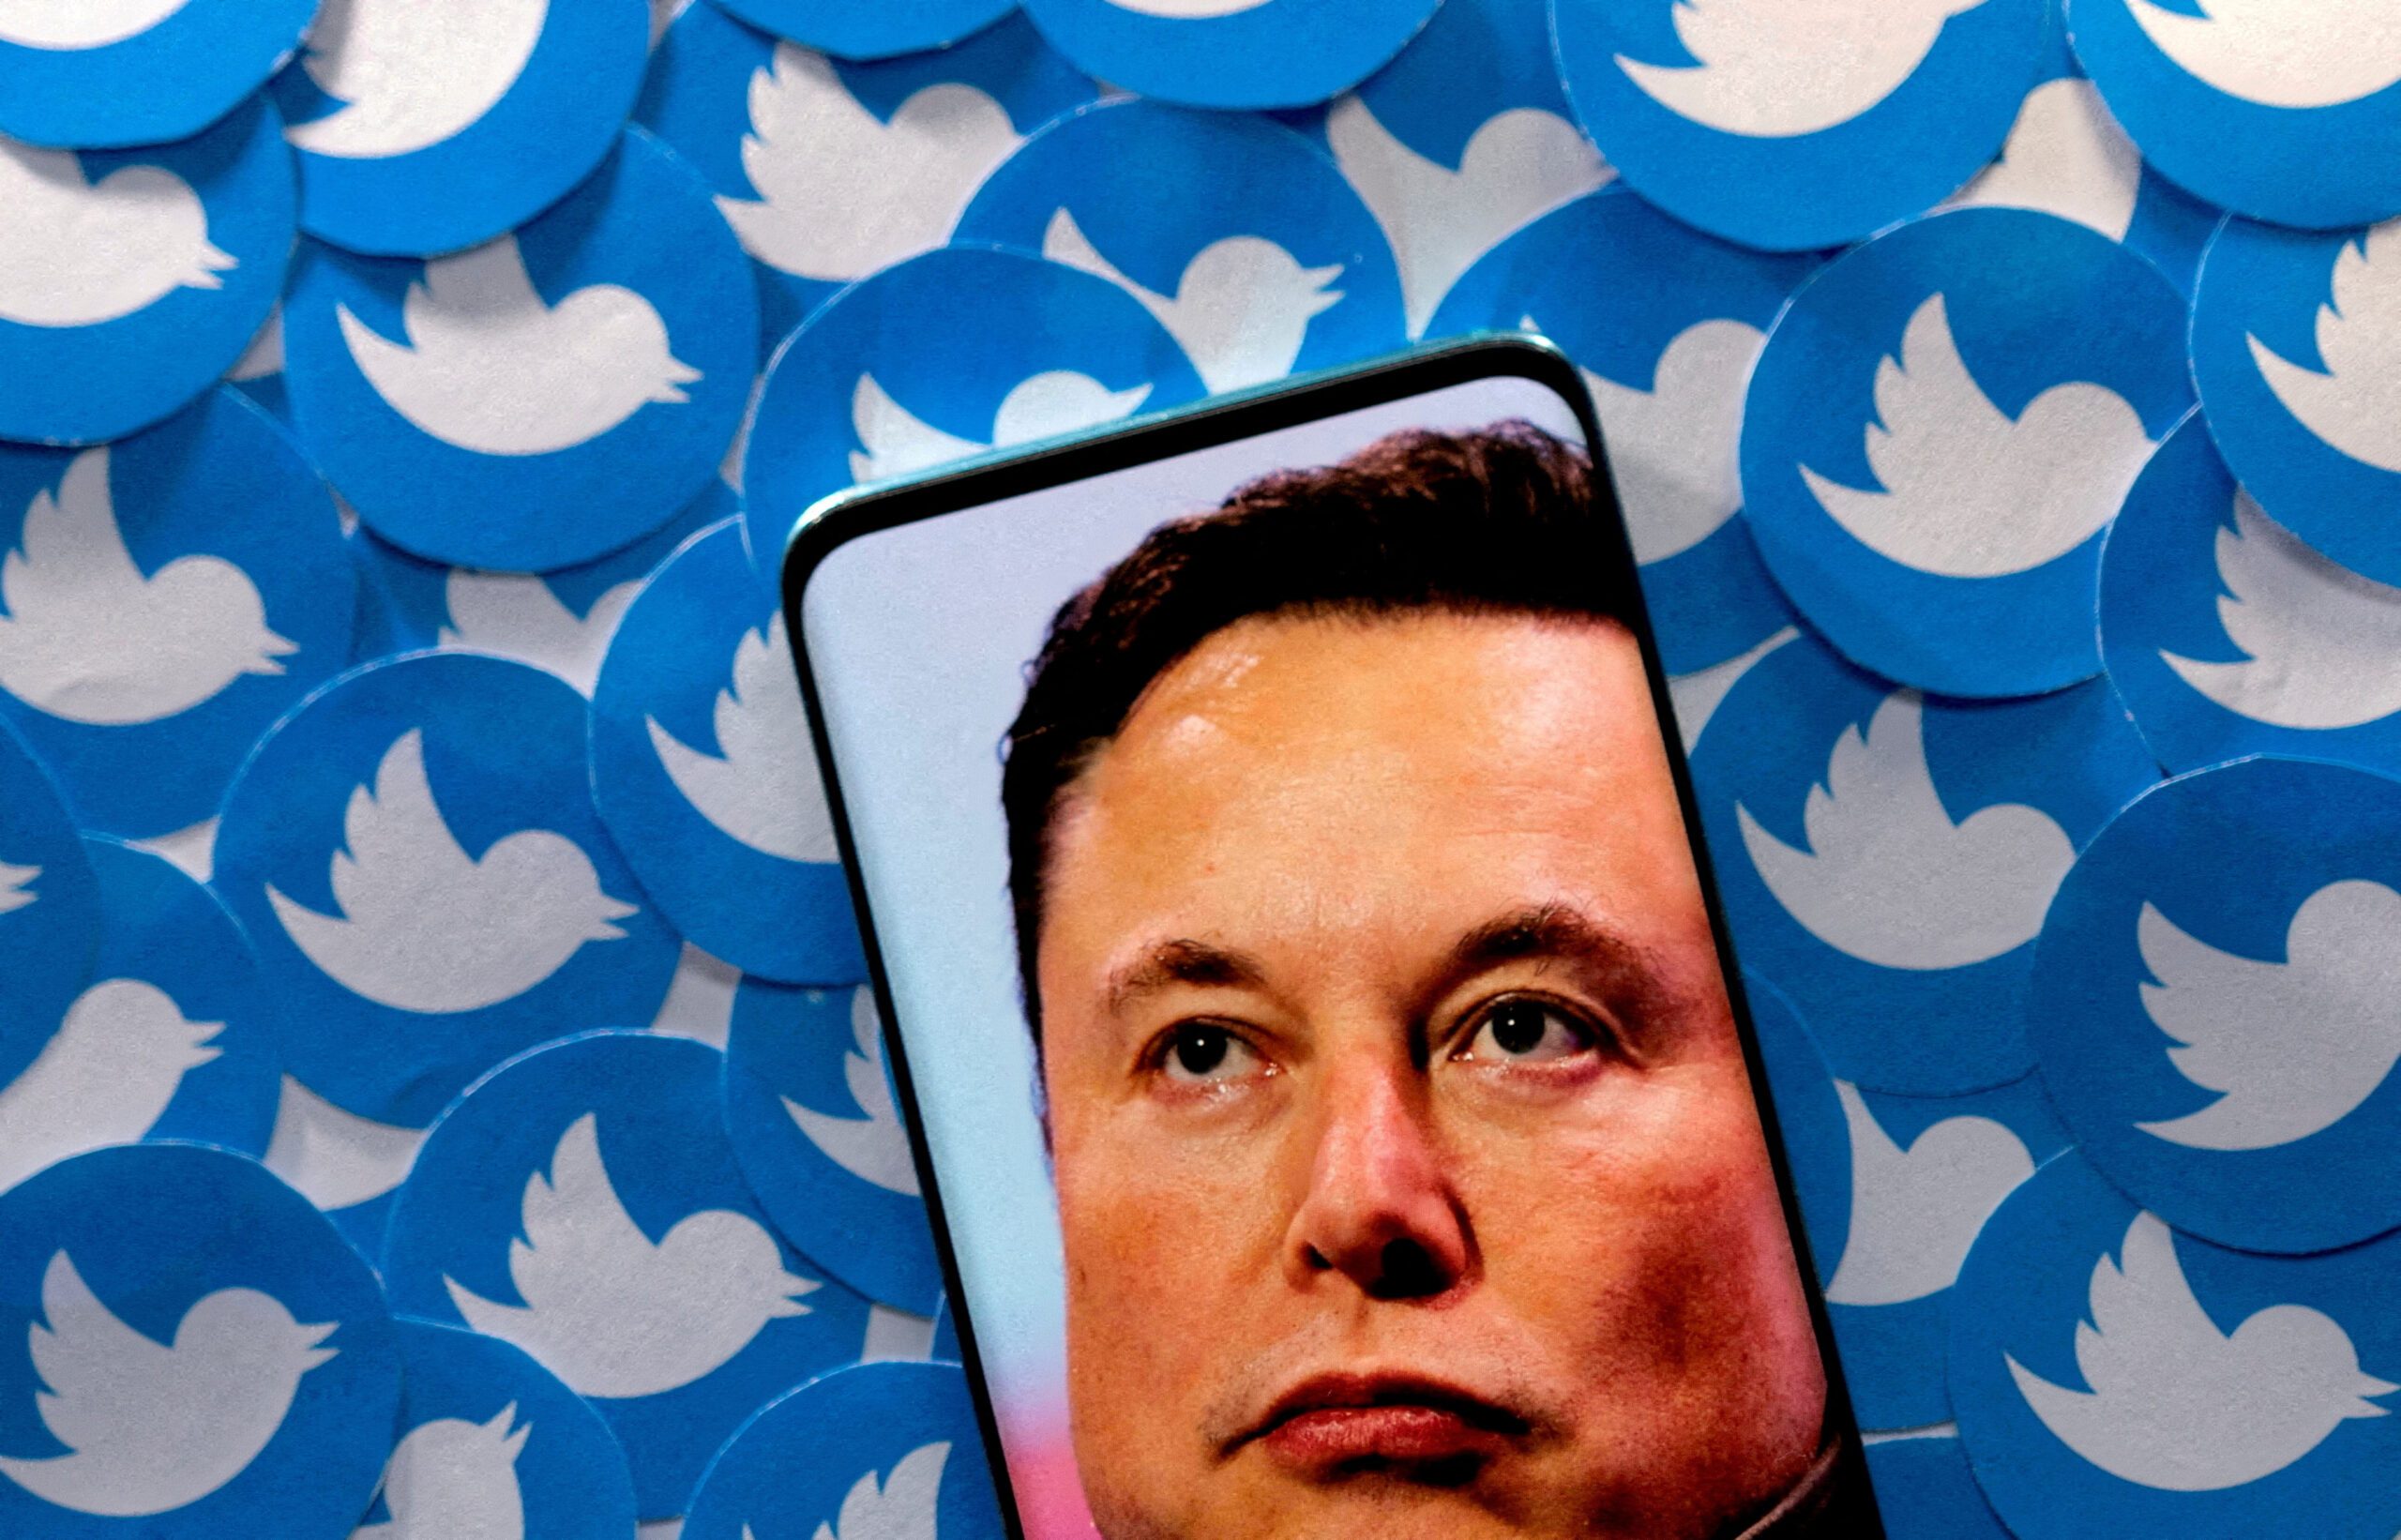 Elon Musk is under federal investigation, Twitter says in court filing